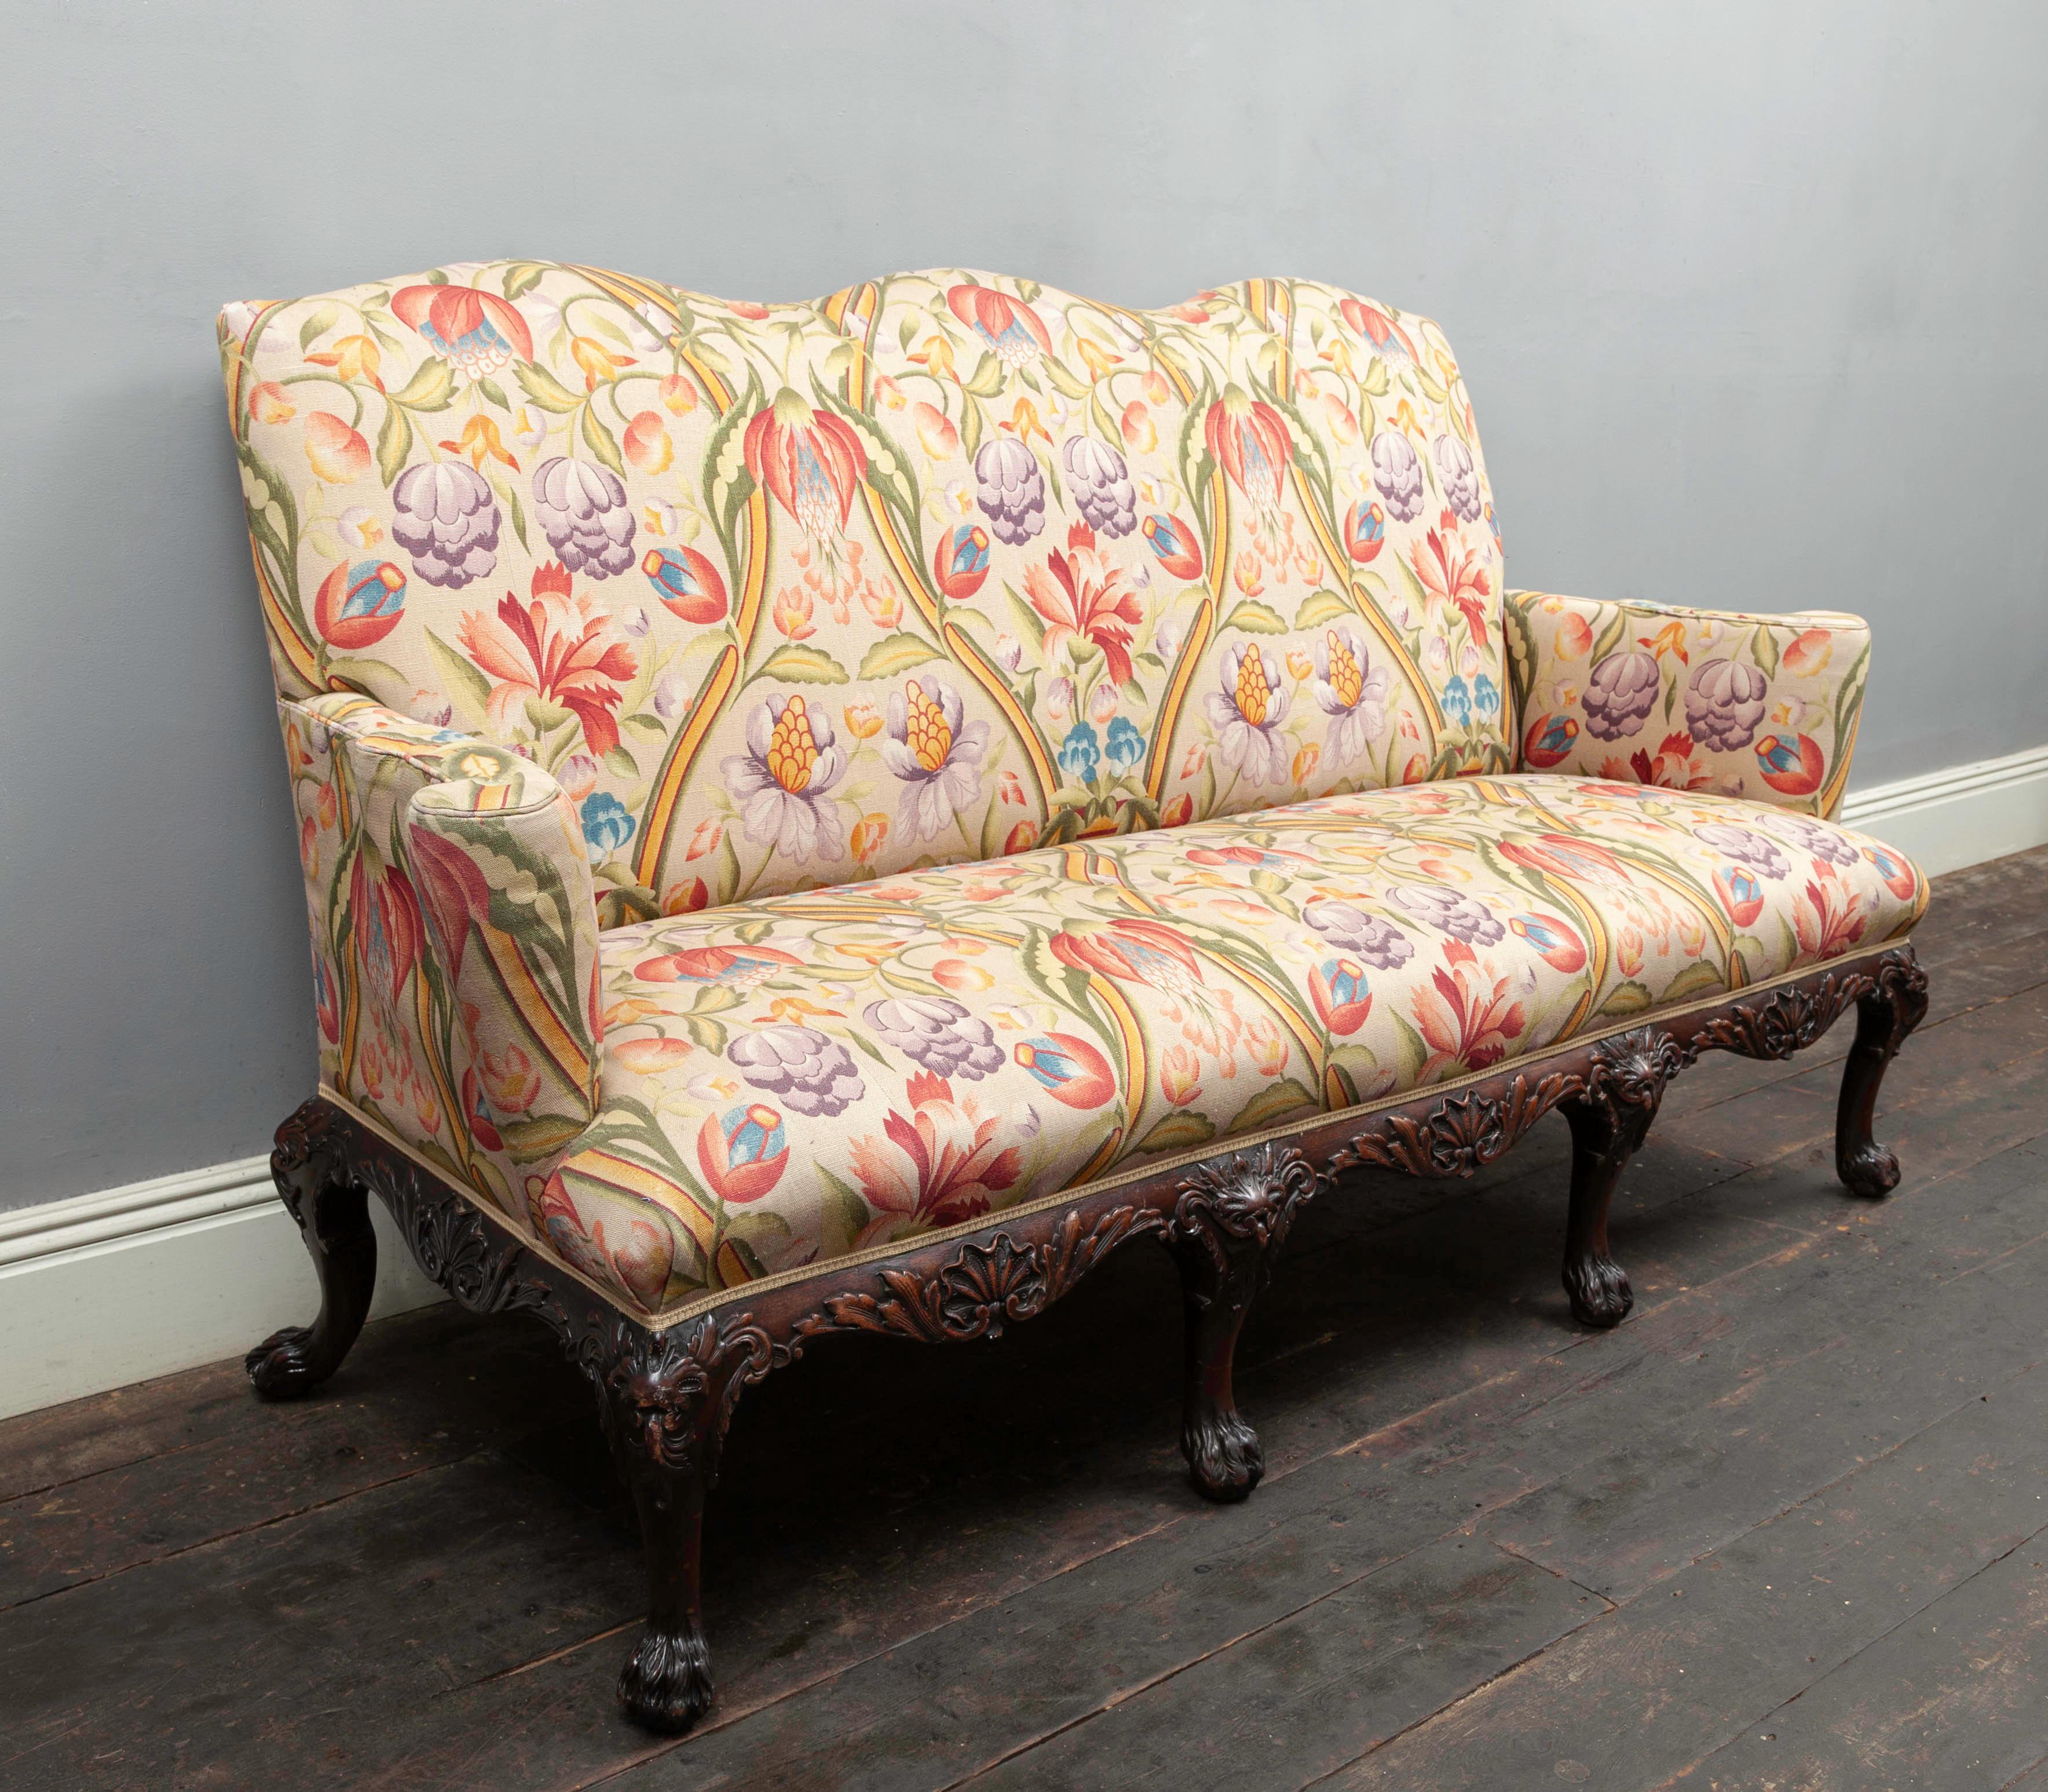 An antique mid-18th century style mahogany settee with later fabric coverings. The serpentine apron is carved with scallop and acanthus decoration, the supporting cabriole legs terminating with ‘hairy paw’ feet.

Upholstered in recent years with a